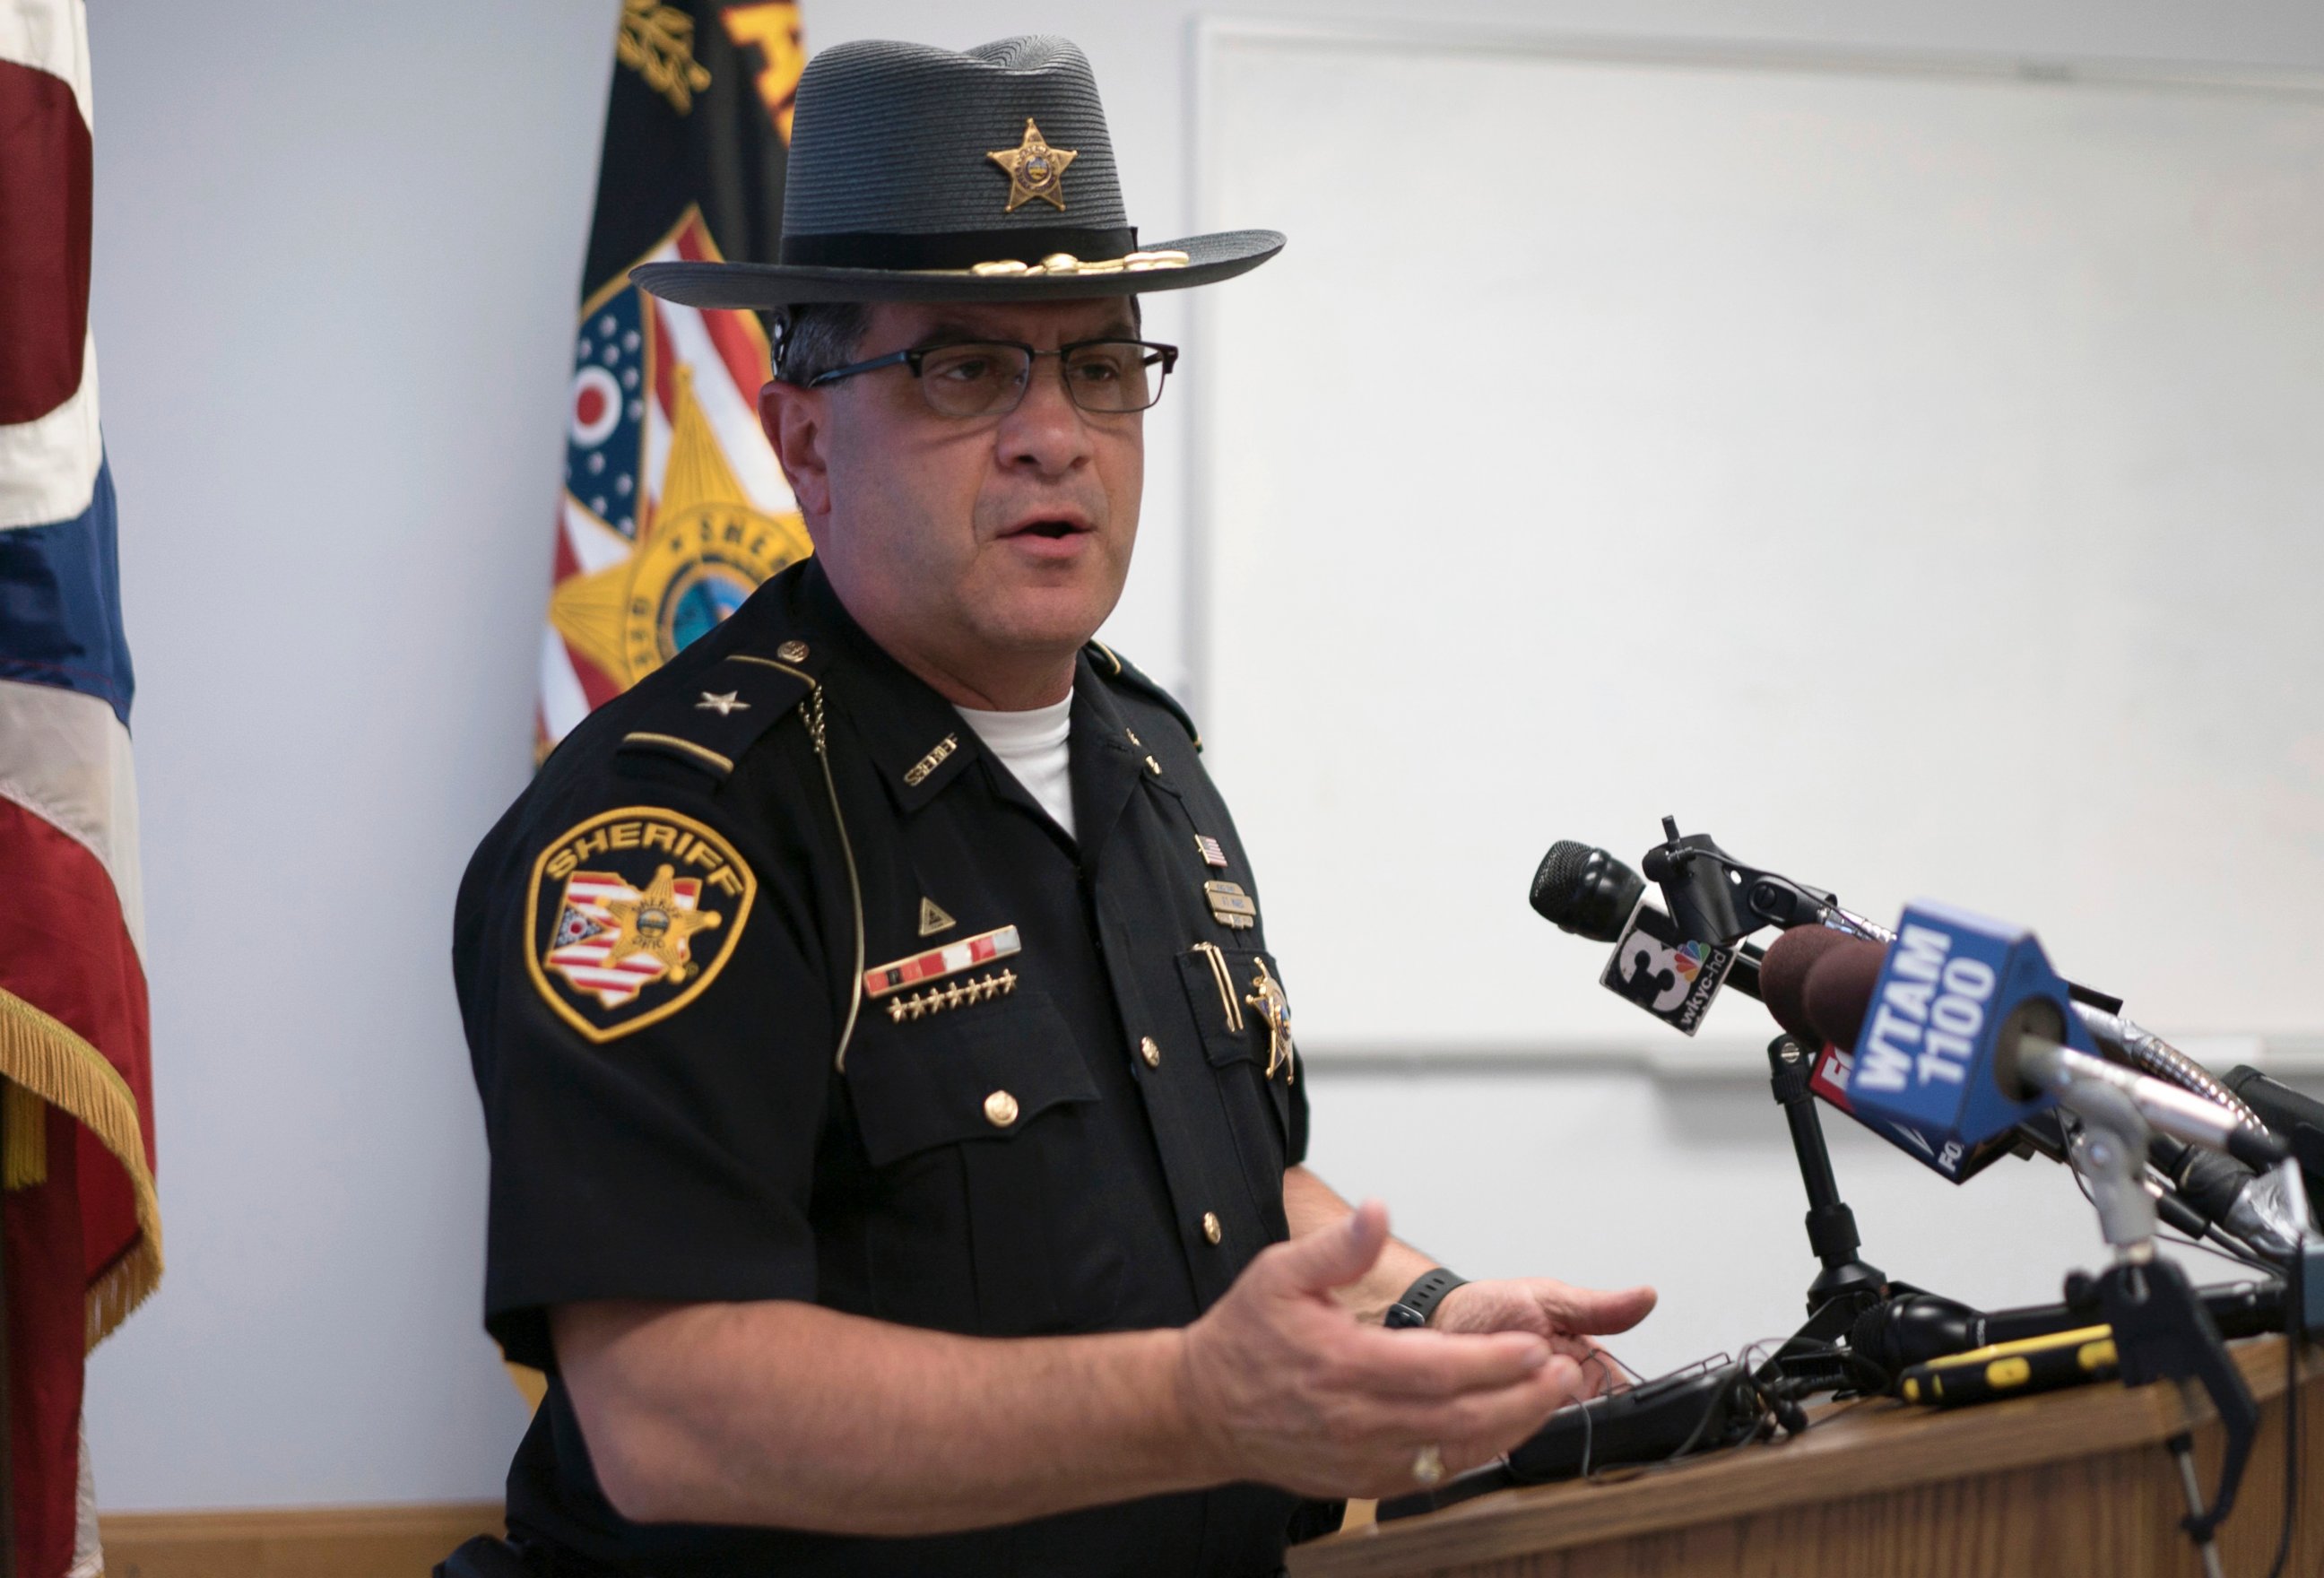 PHOTO: Stark County Sheriff George T. Maier speaks to reporters in Canton, Ohio, June 13, 2017.